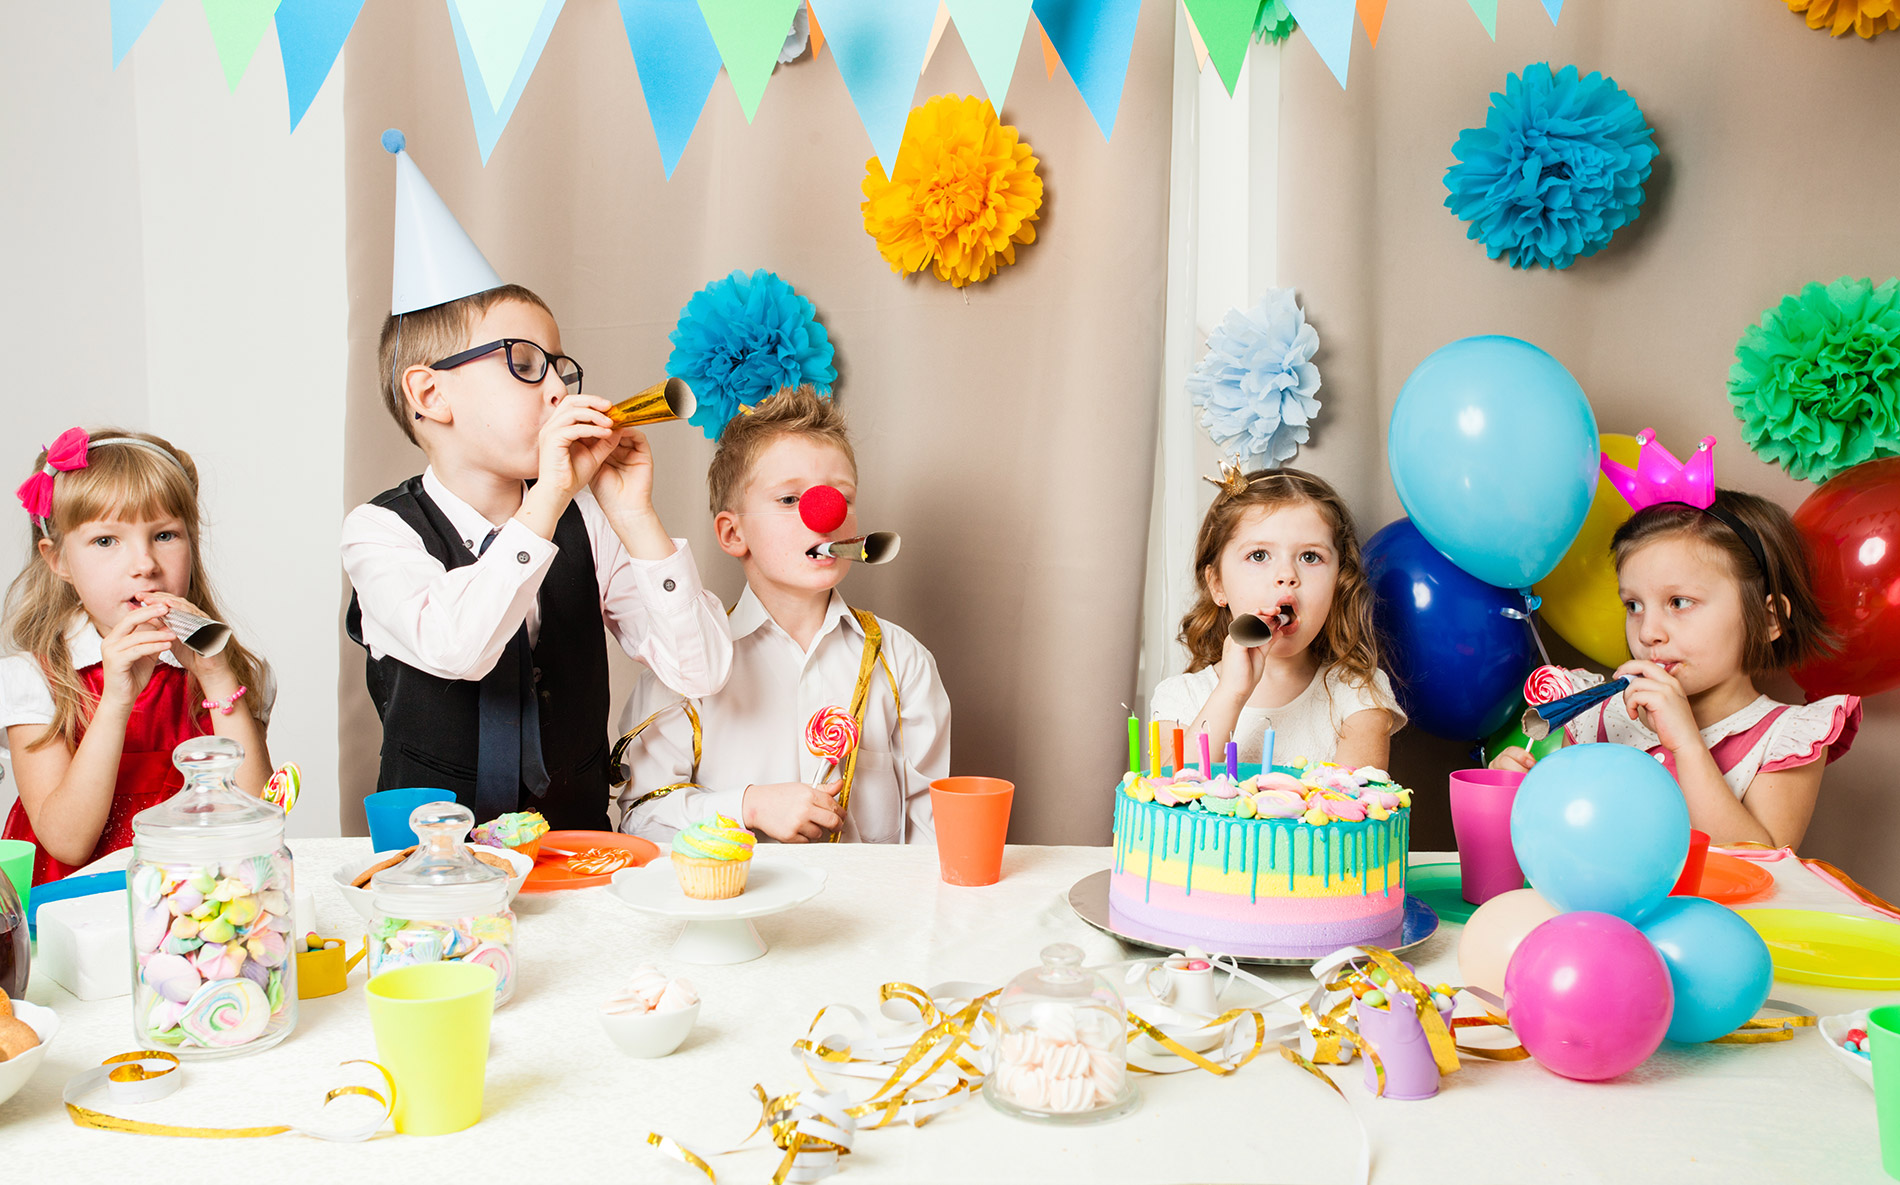 Children having a party in front of a birthday cake